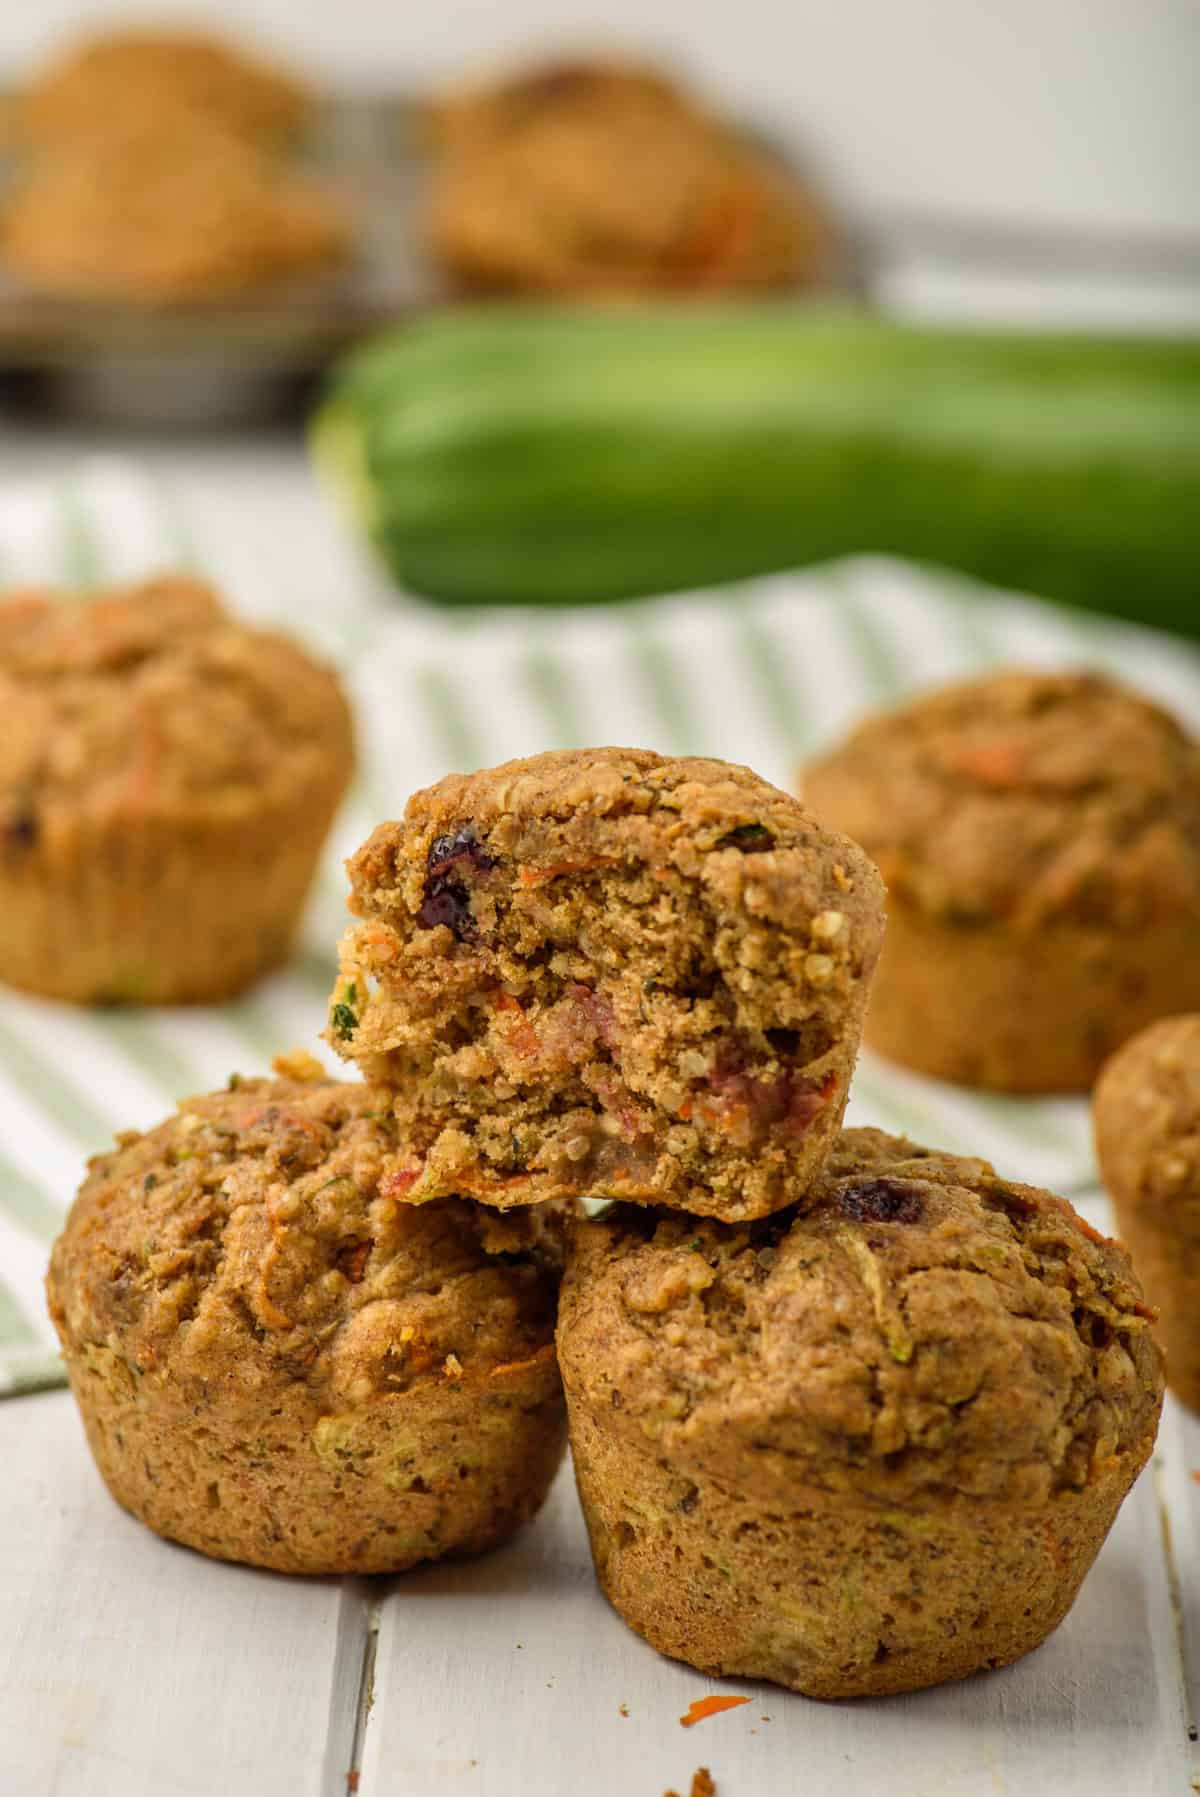 Healthy carrot cake zucchini muffins come together in just a half hour and have all your favorite carrot cake flavors with an added kick of nutrients from wholesome ingredients! #carrotcakemuffins #healthycarrotcake #carrotcakezucchinimuffins #carrotcakemuffinrecipe #carrotcake #healthymuffins